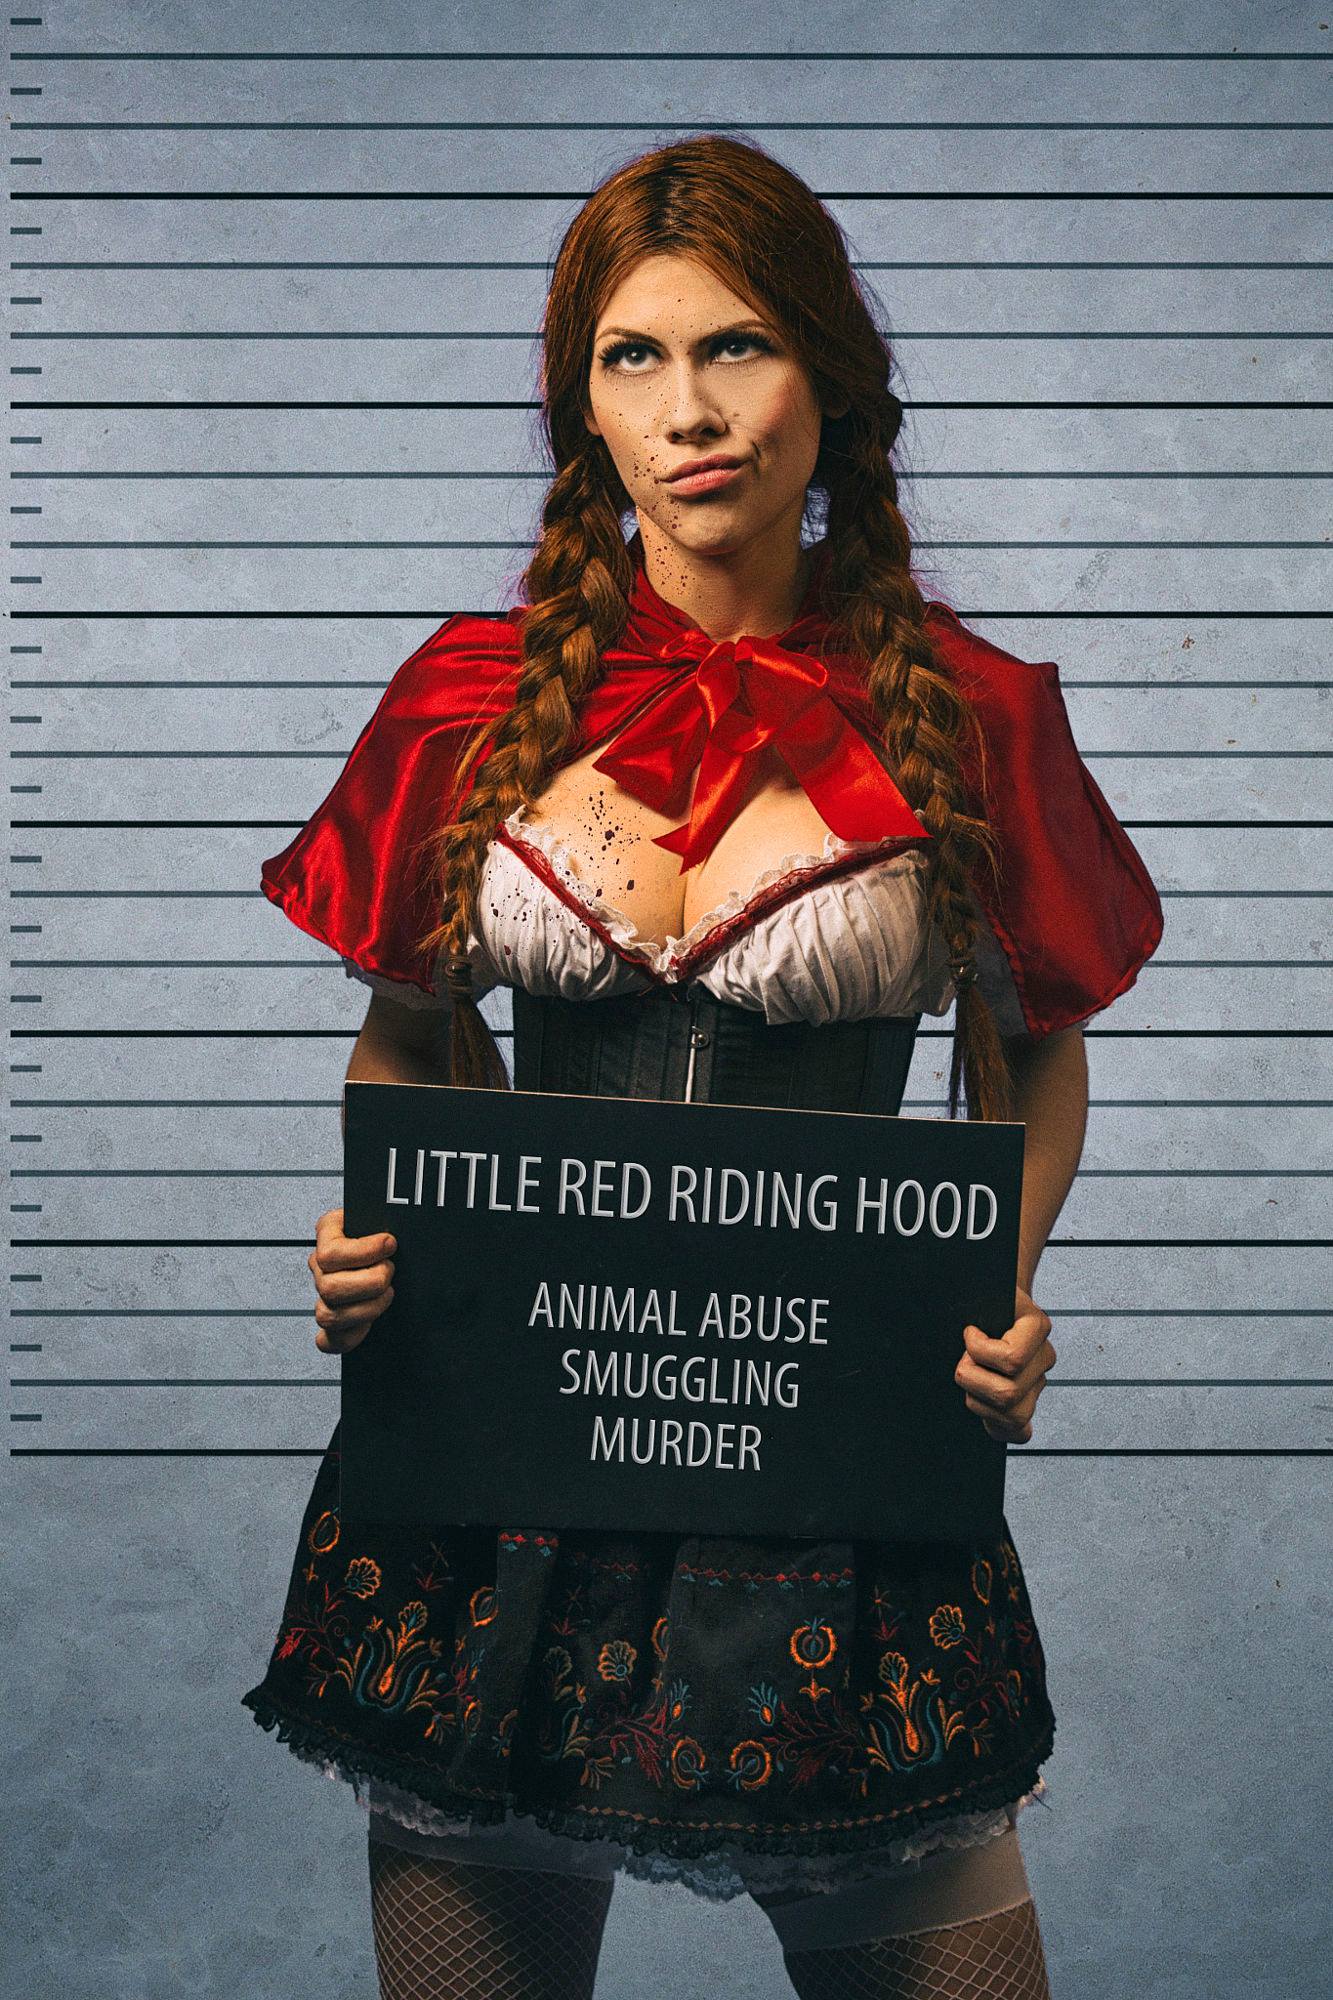 fashion model - Little Red Riding Hood Animal Abuse Smuggling Murder